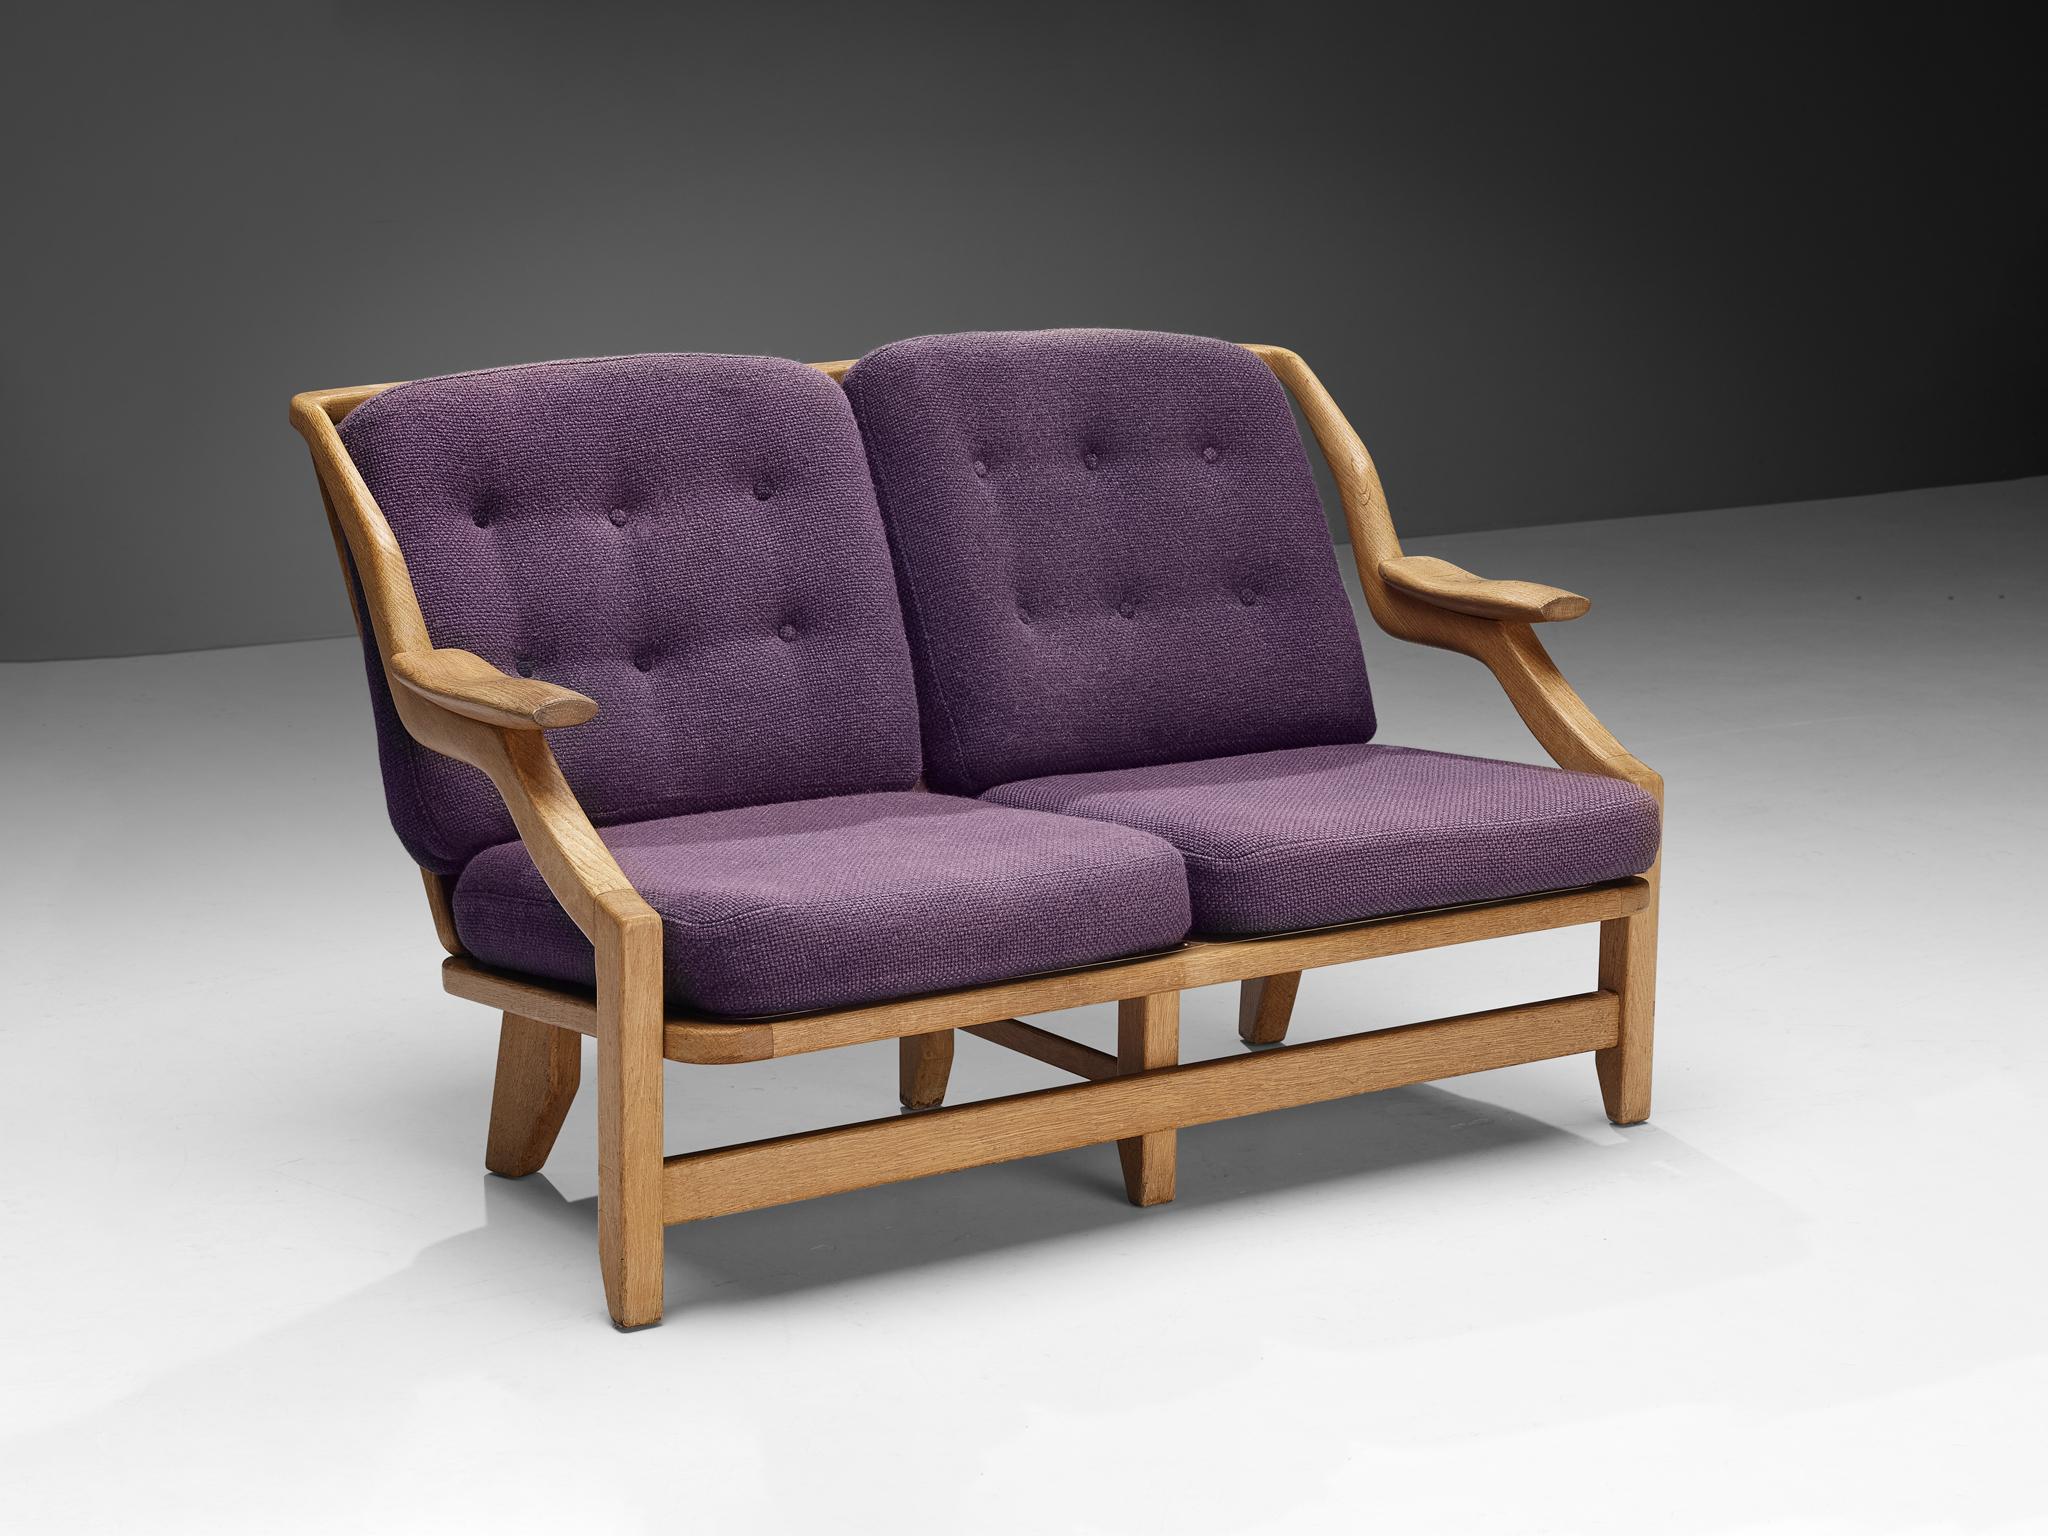 Guillerme & Chambron for Votre Maison, sofa, model 'Gregoire', fabric, oak, France, 1960s

The ‘Gregoire’ sofa is designed by the French designer duo Jacques Chambron and Robert Guillerme. The design features a stable construction featuring the